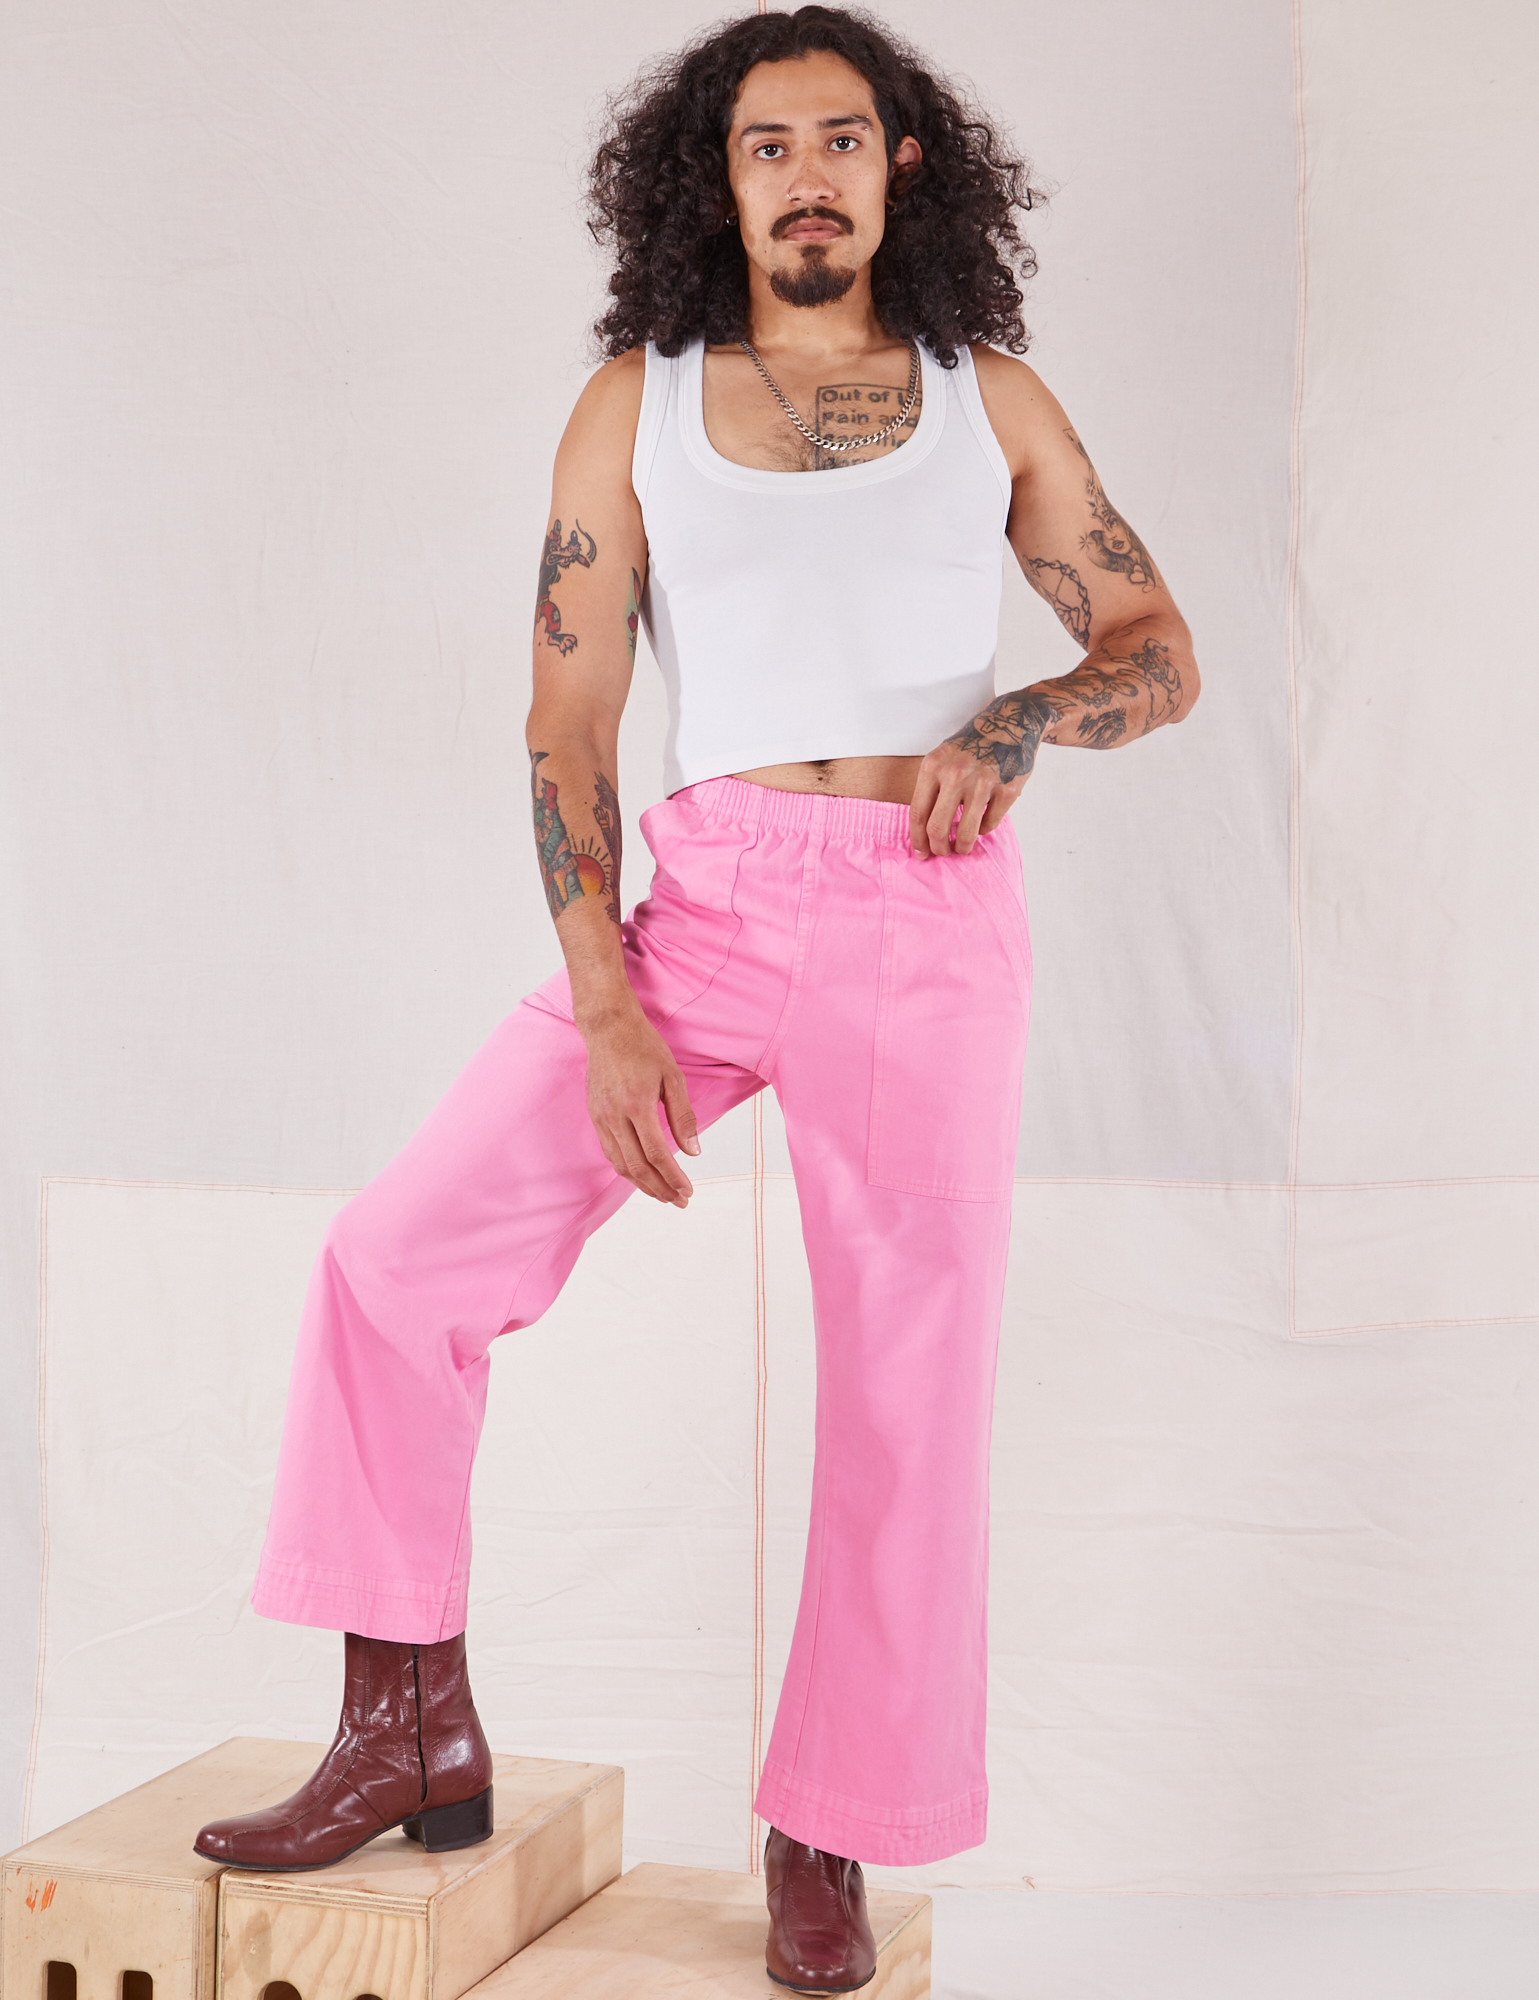 Jesse is 5&#39;8&quot; and wearing XXS Action Pants in Bubblegum Pink paired with Cropped Tank in vintage tee off-white